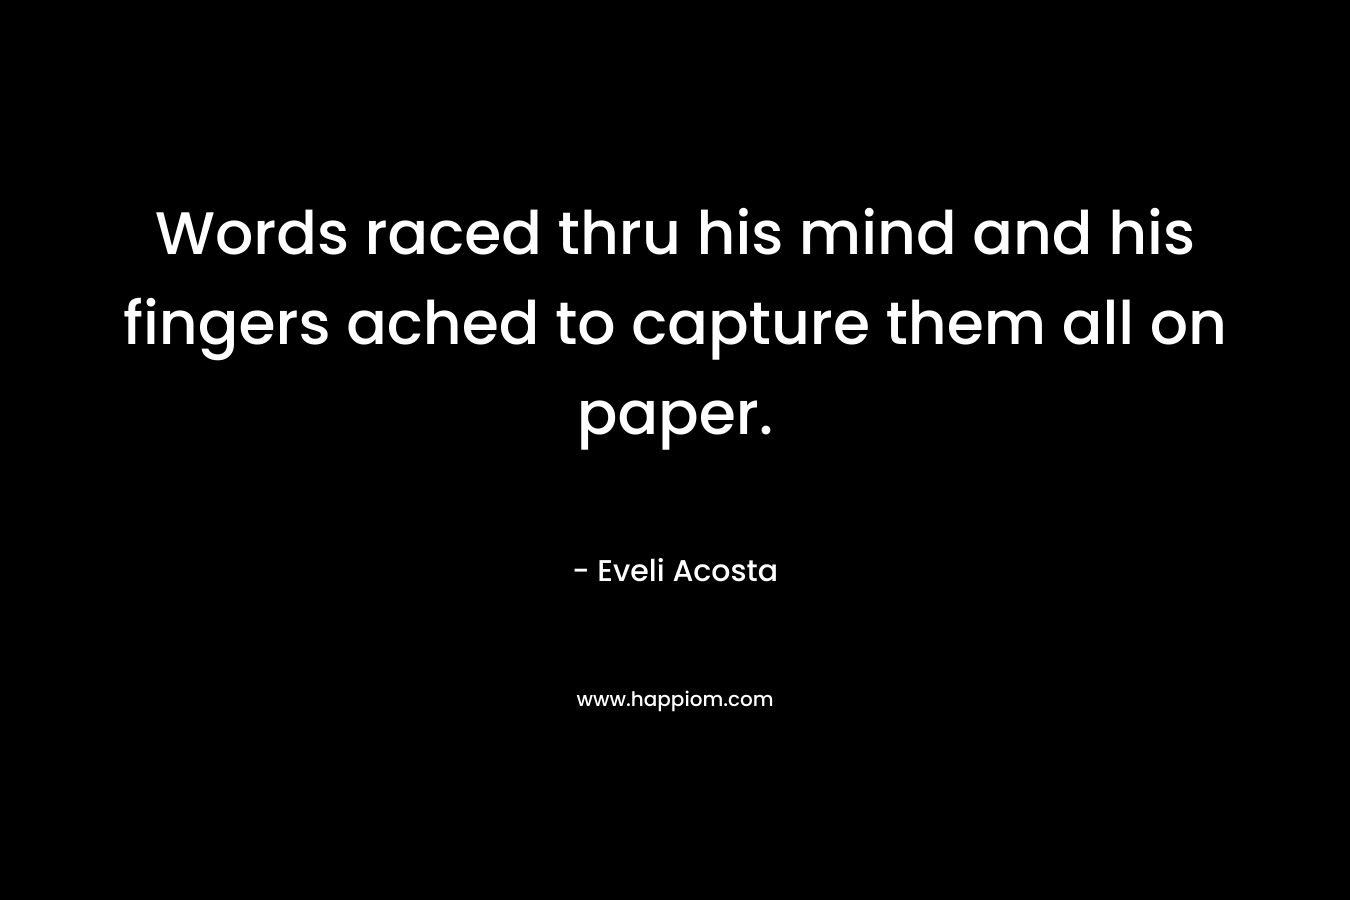 Words raced thru his mind and his fingers ached to capture them all on paper.